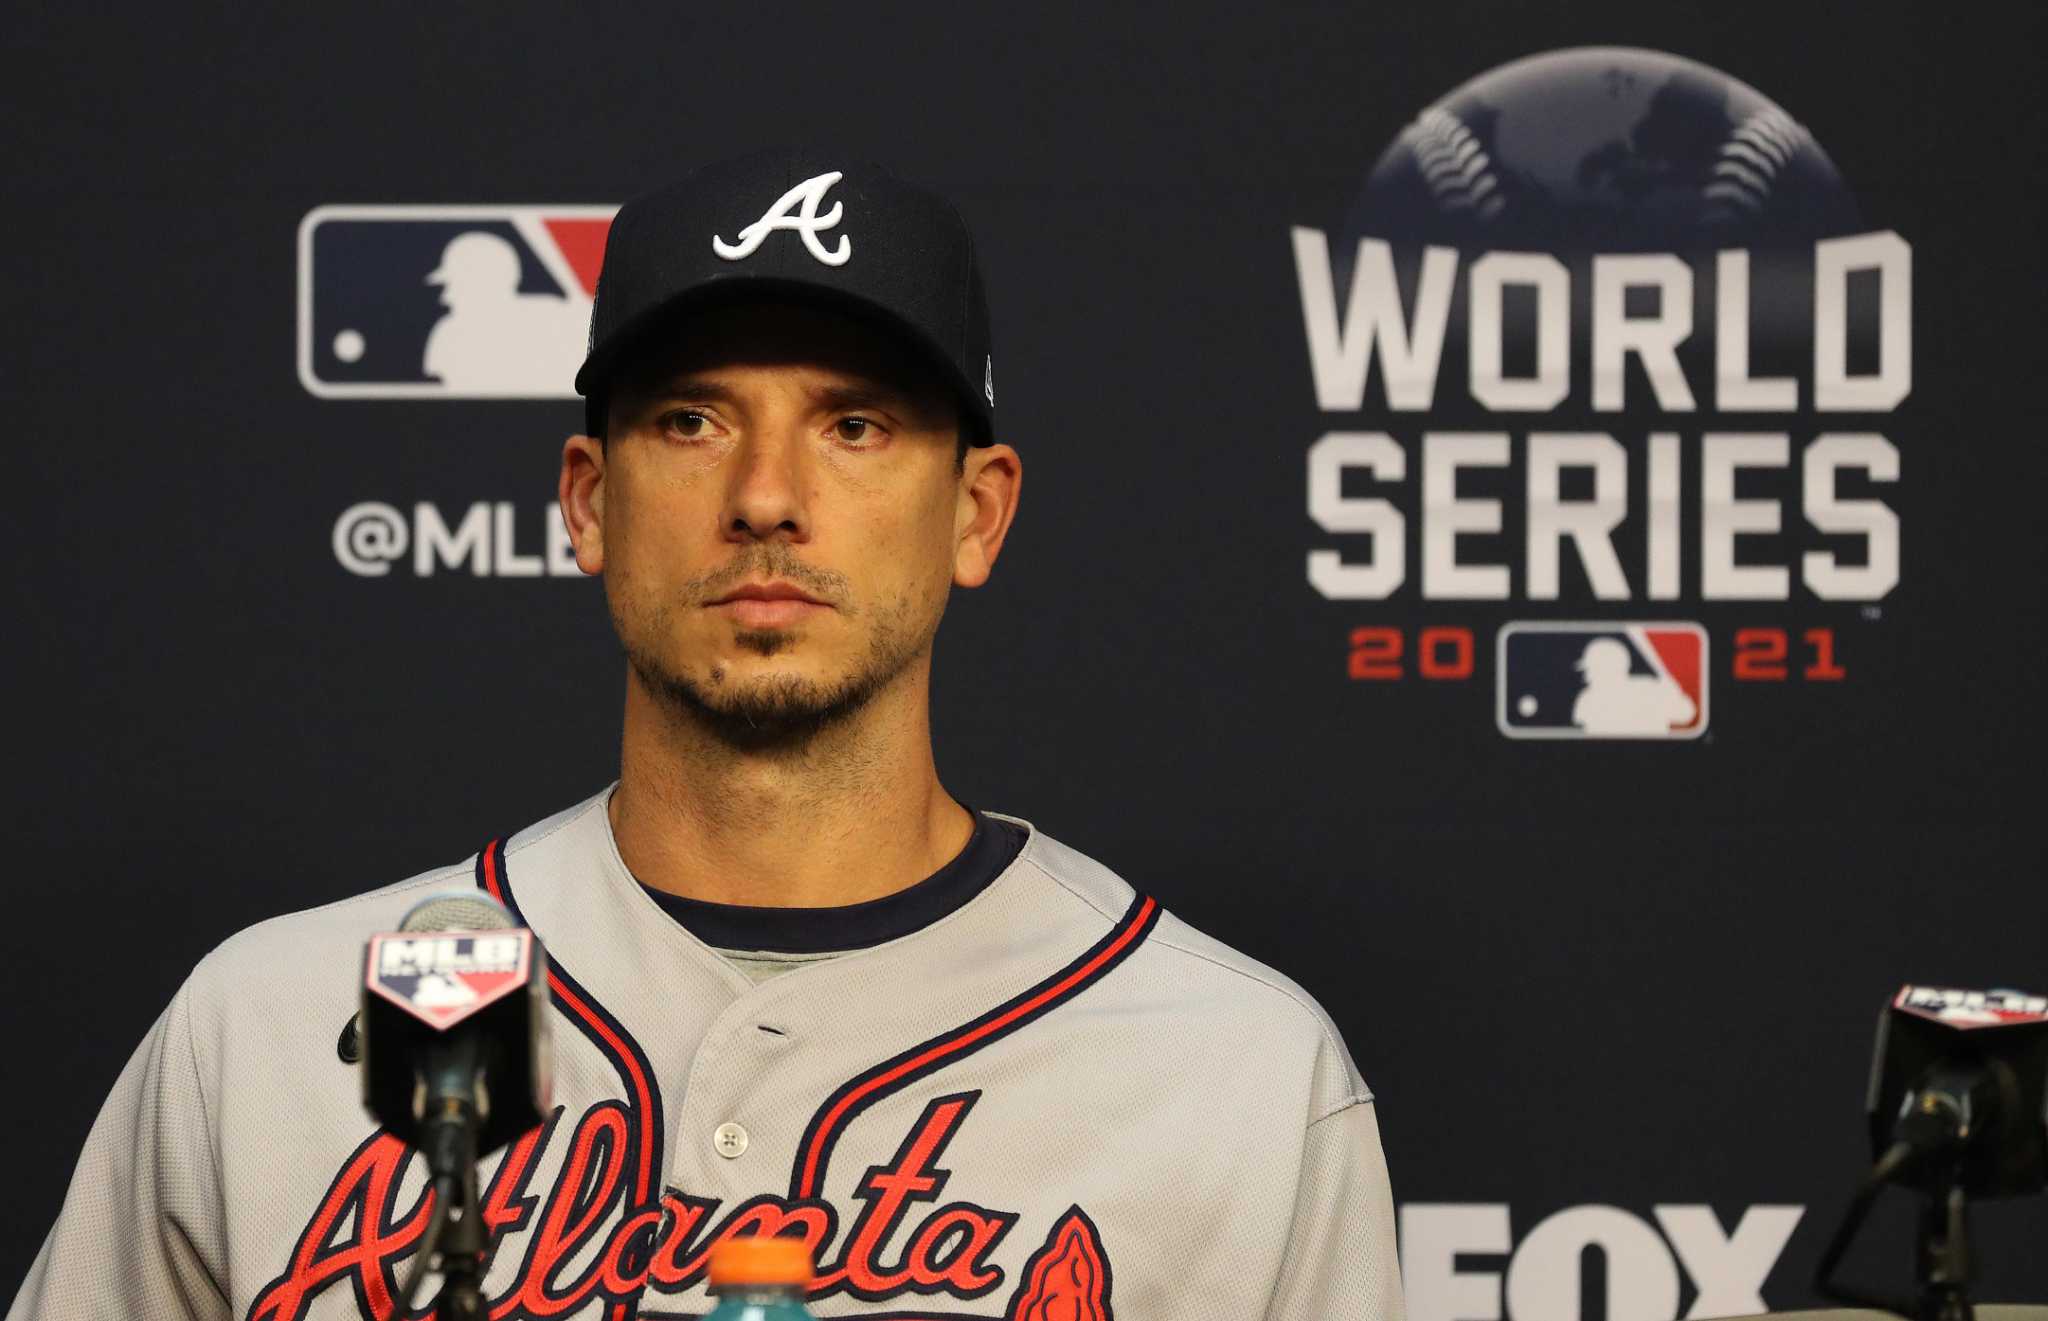 Meet Charlie Morton, the former Connecticut high school star who's starting  Game 1 of the World Series